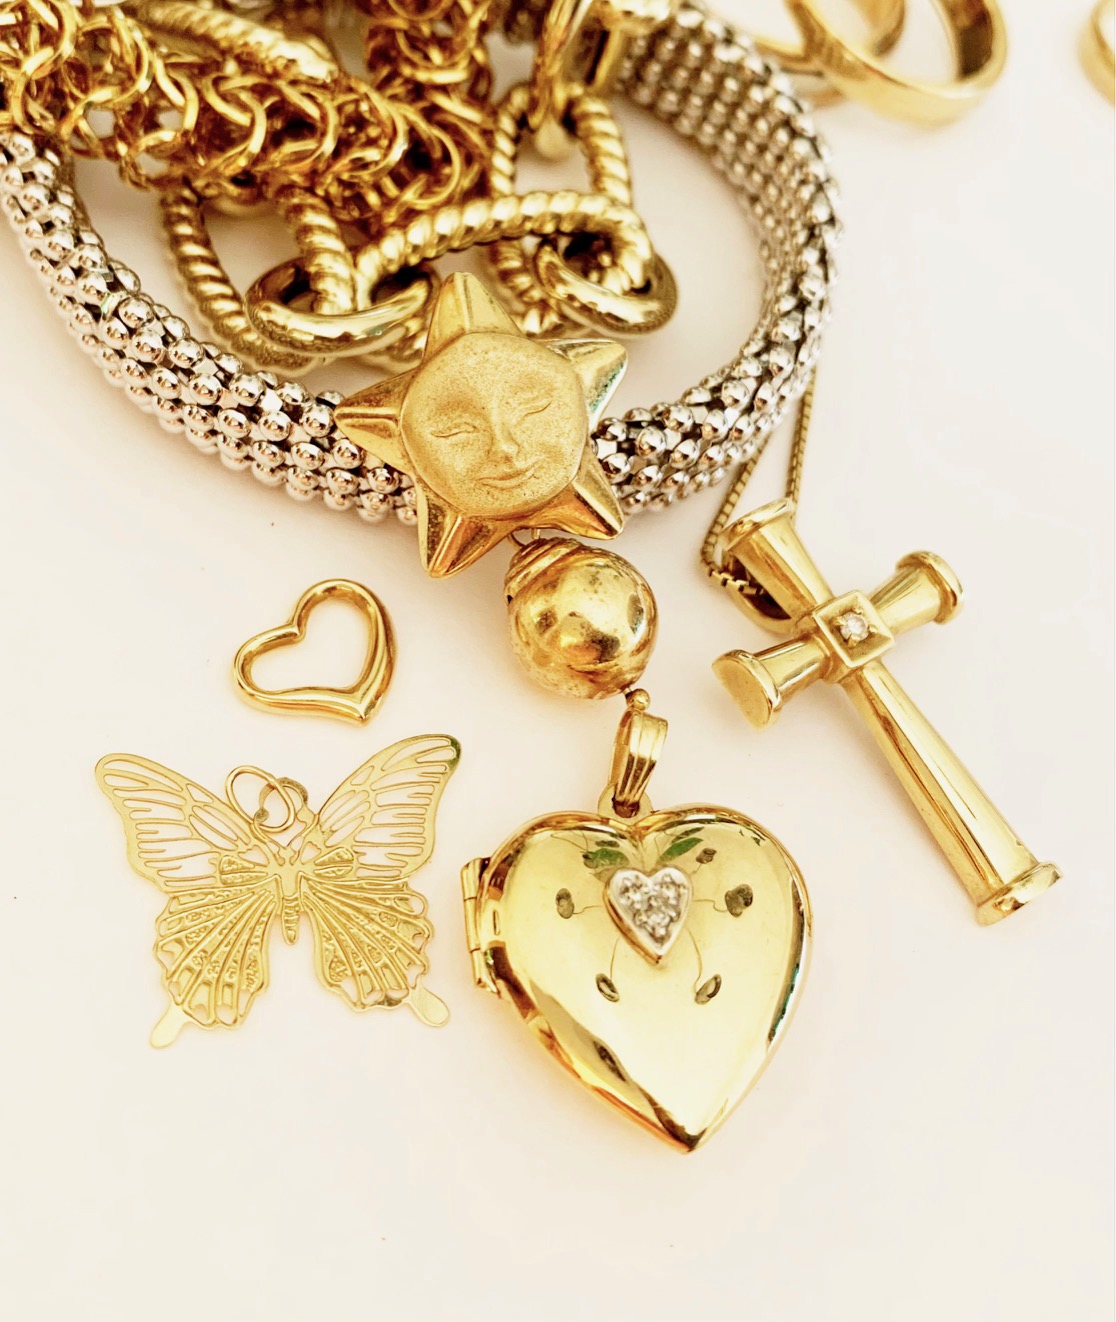 Assortment of gold jewelry including heart pendants, a star-shaped charm, and a cross with diamond, available for purchase or sale.